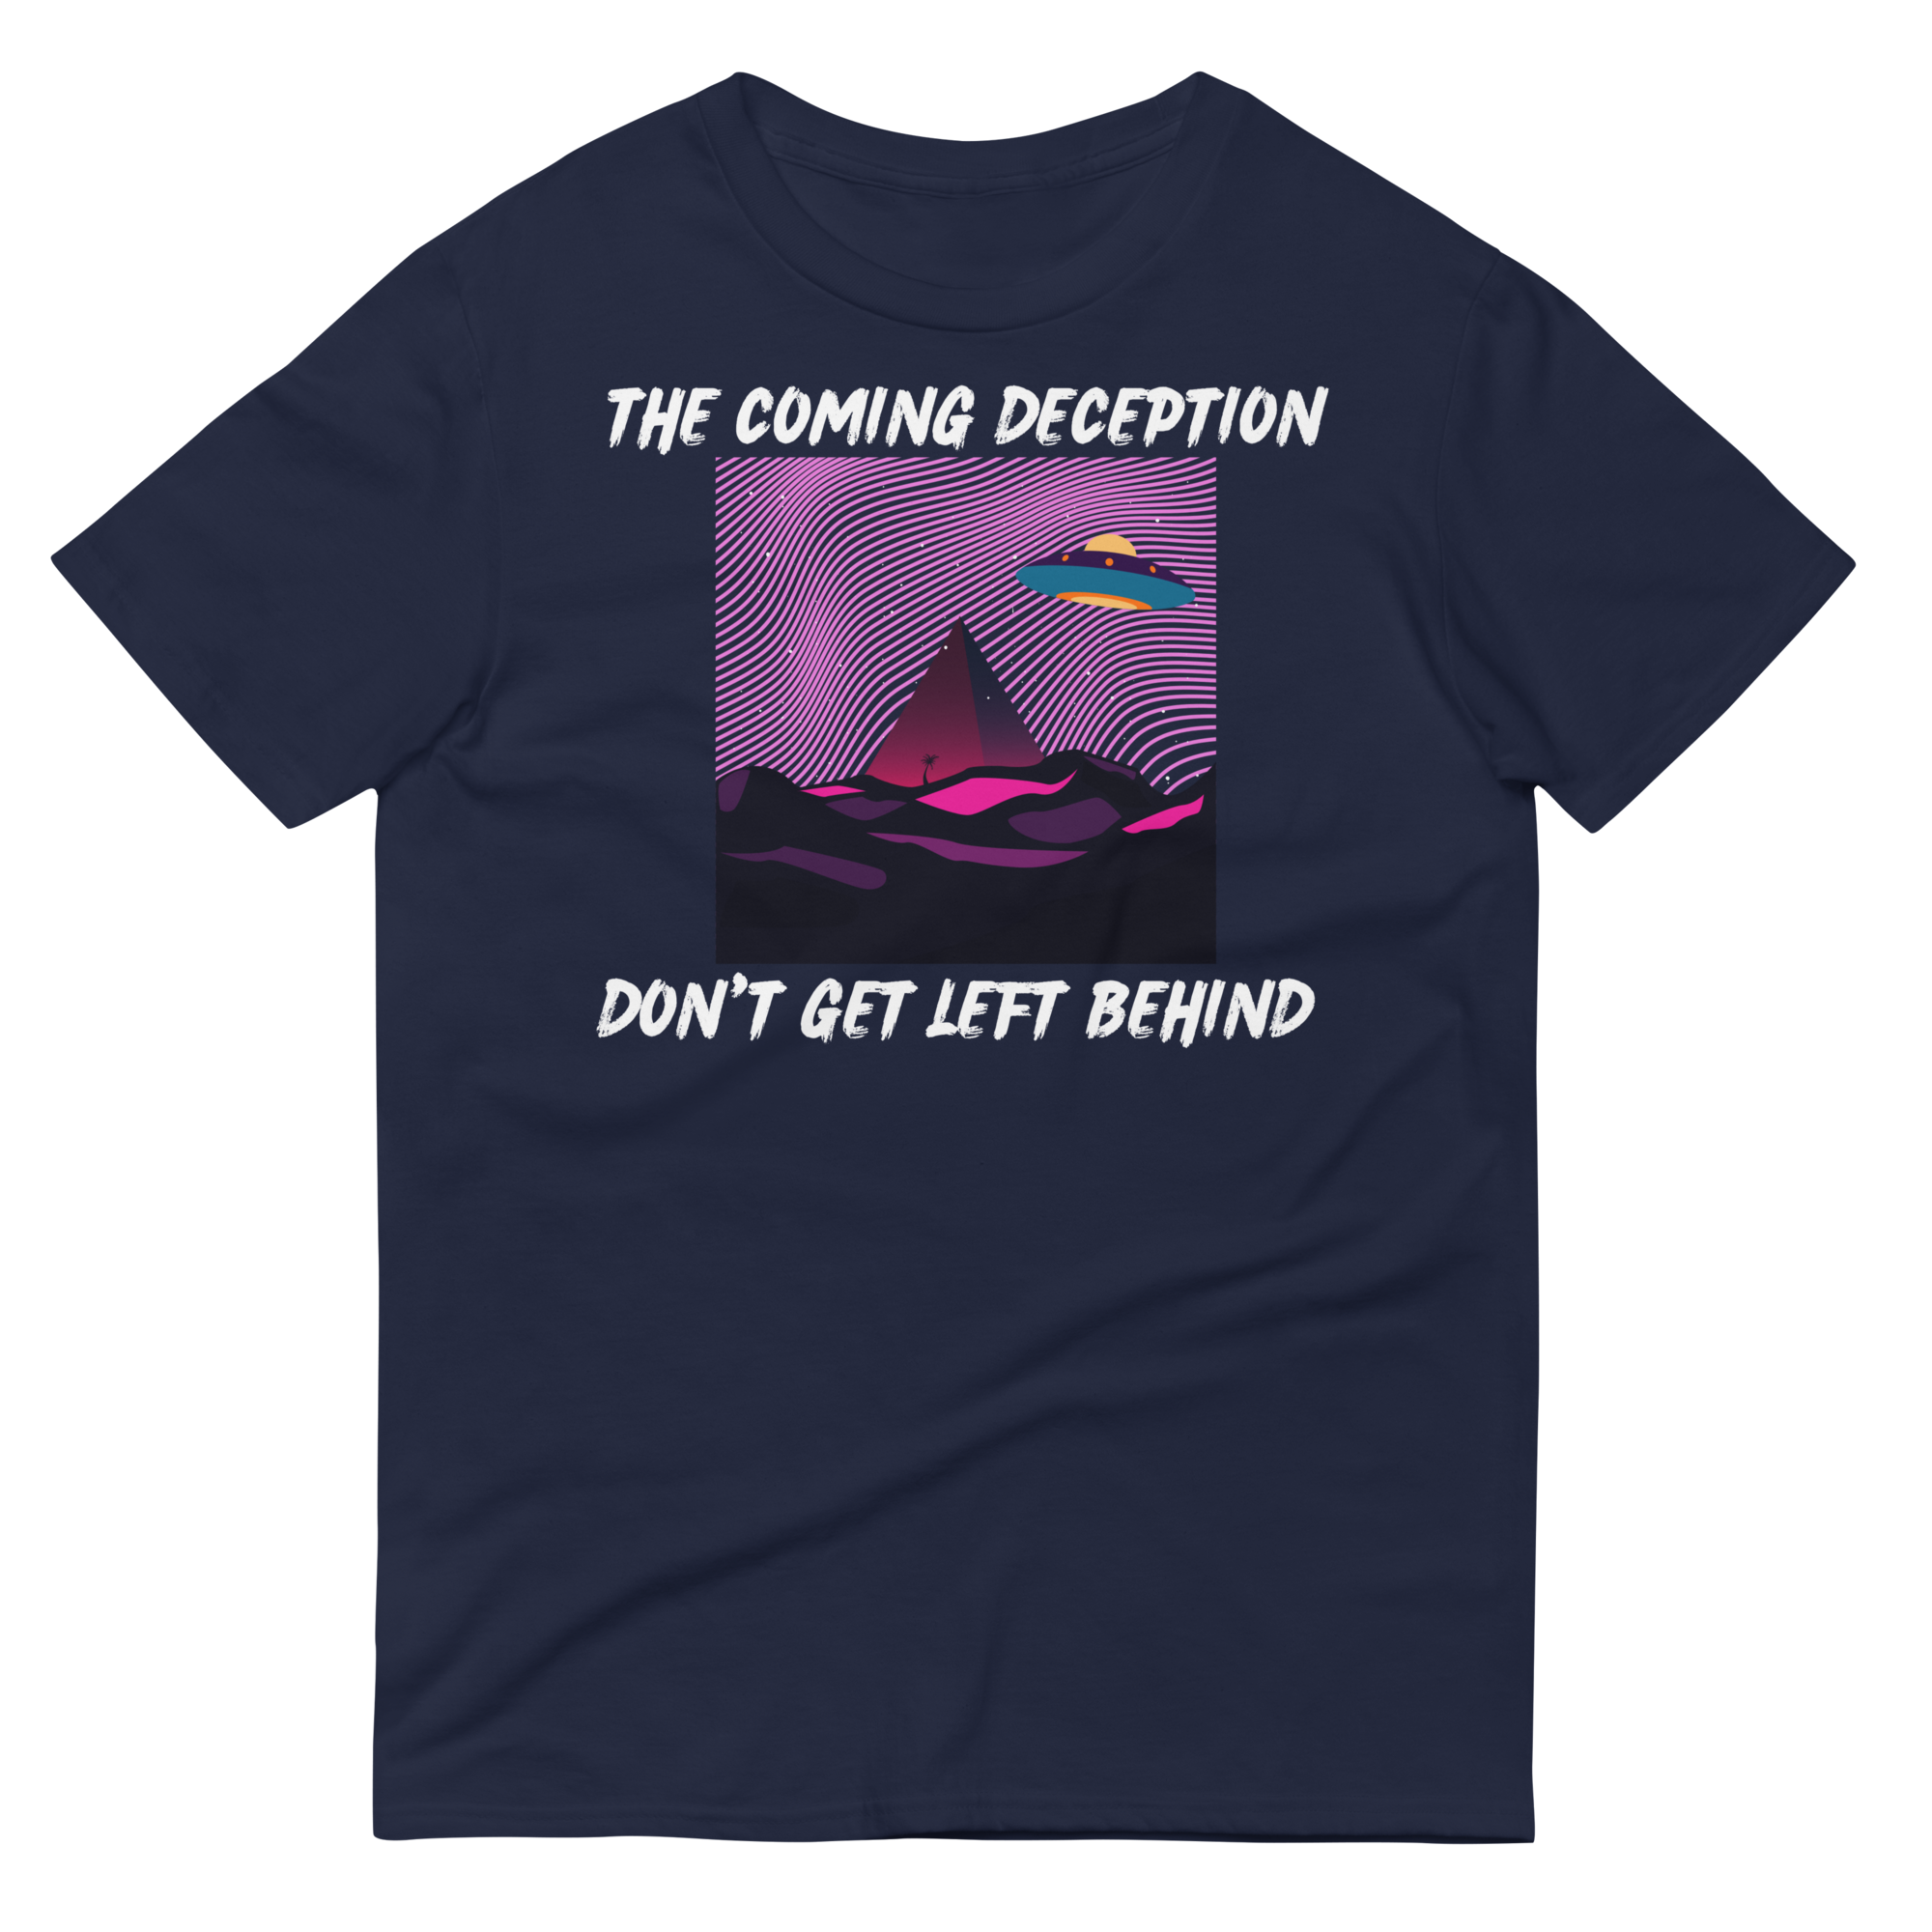 The Coming Deception 2 Short-Sleeve T-Shirt